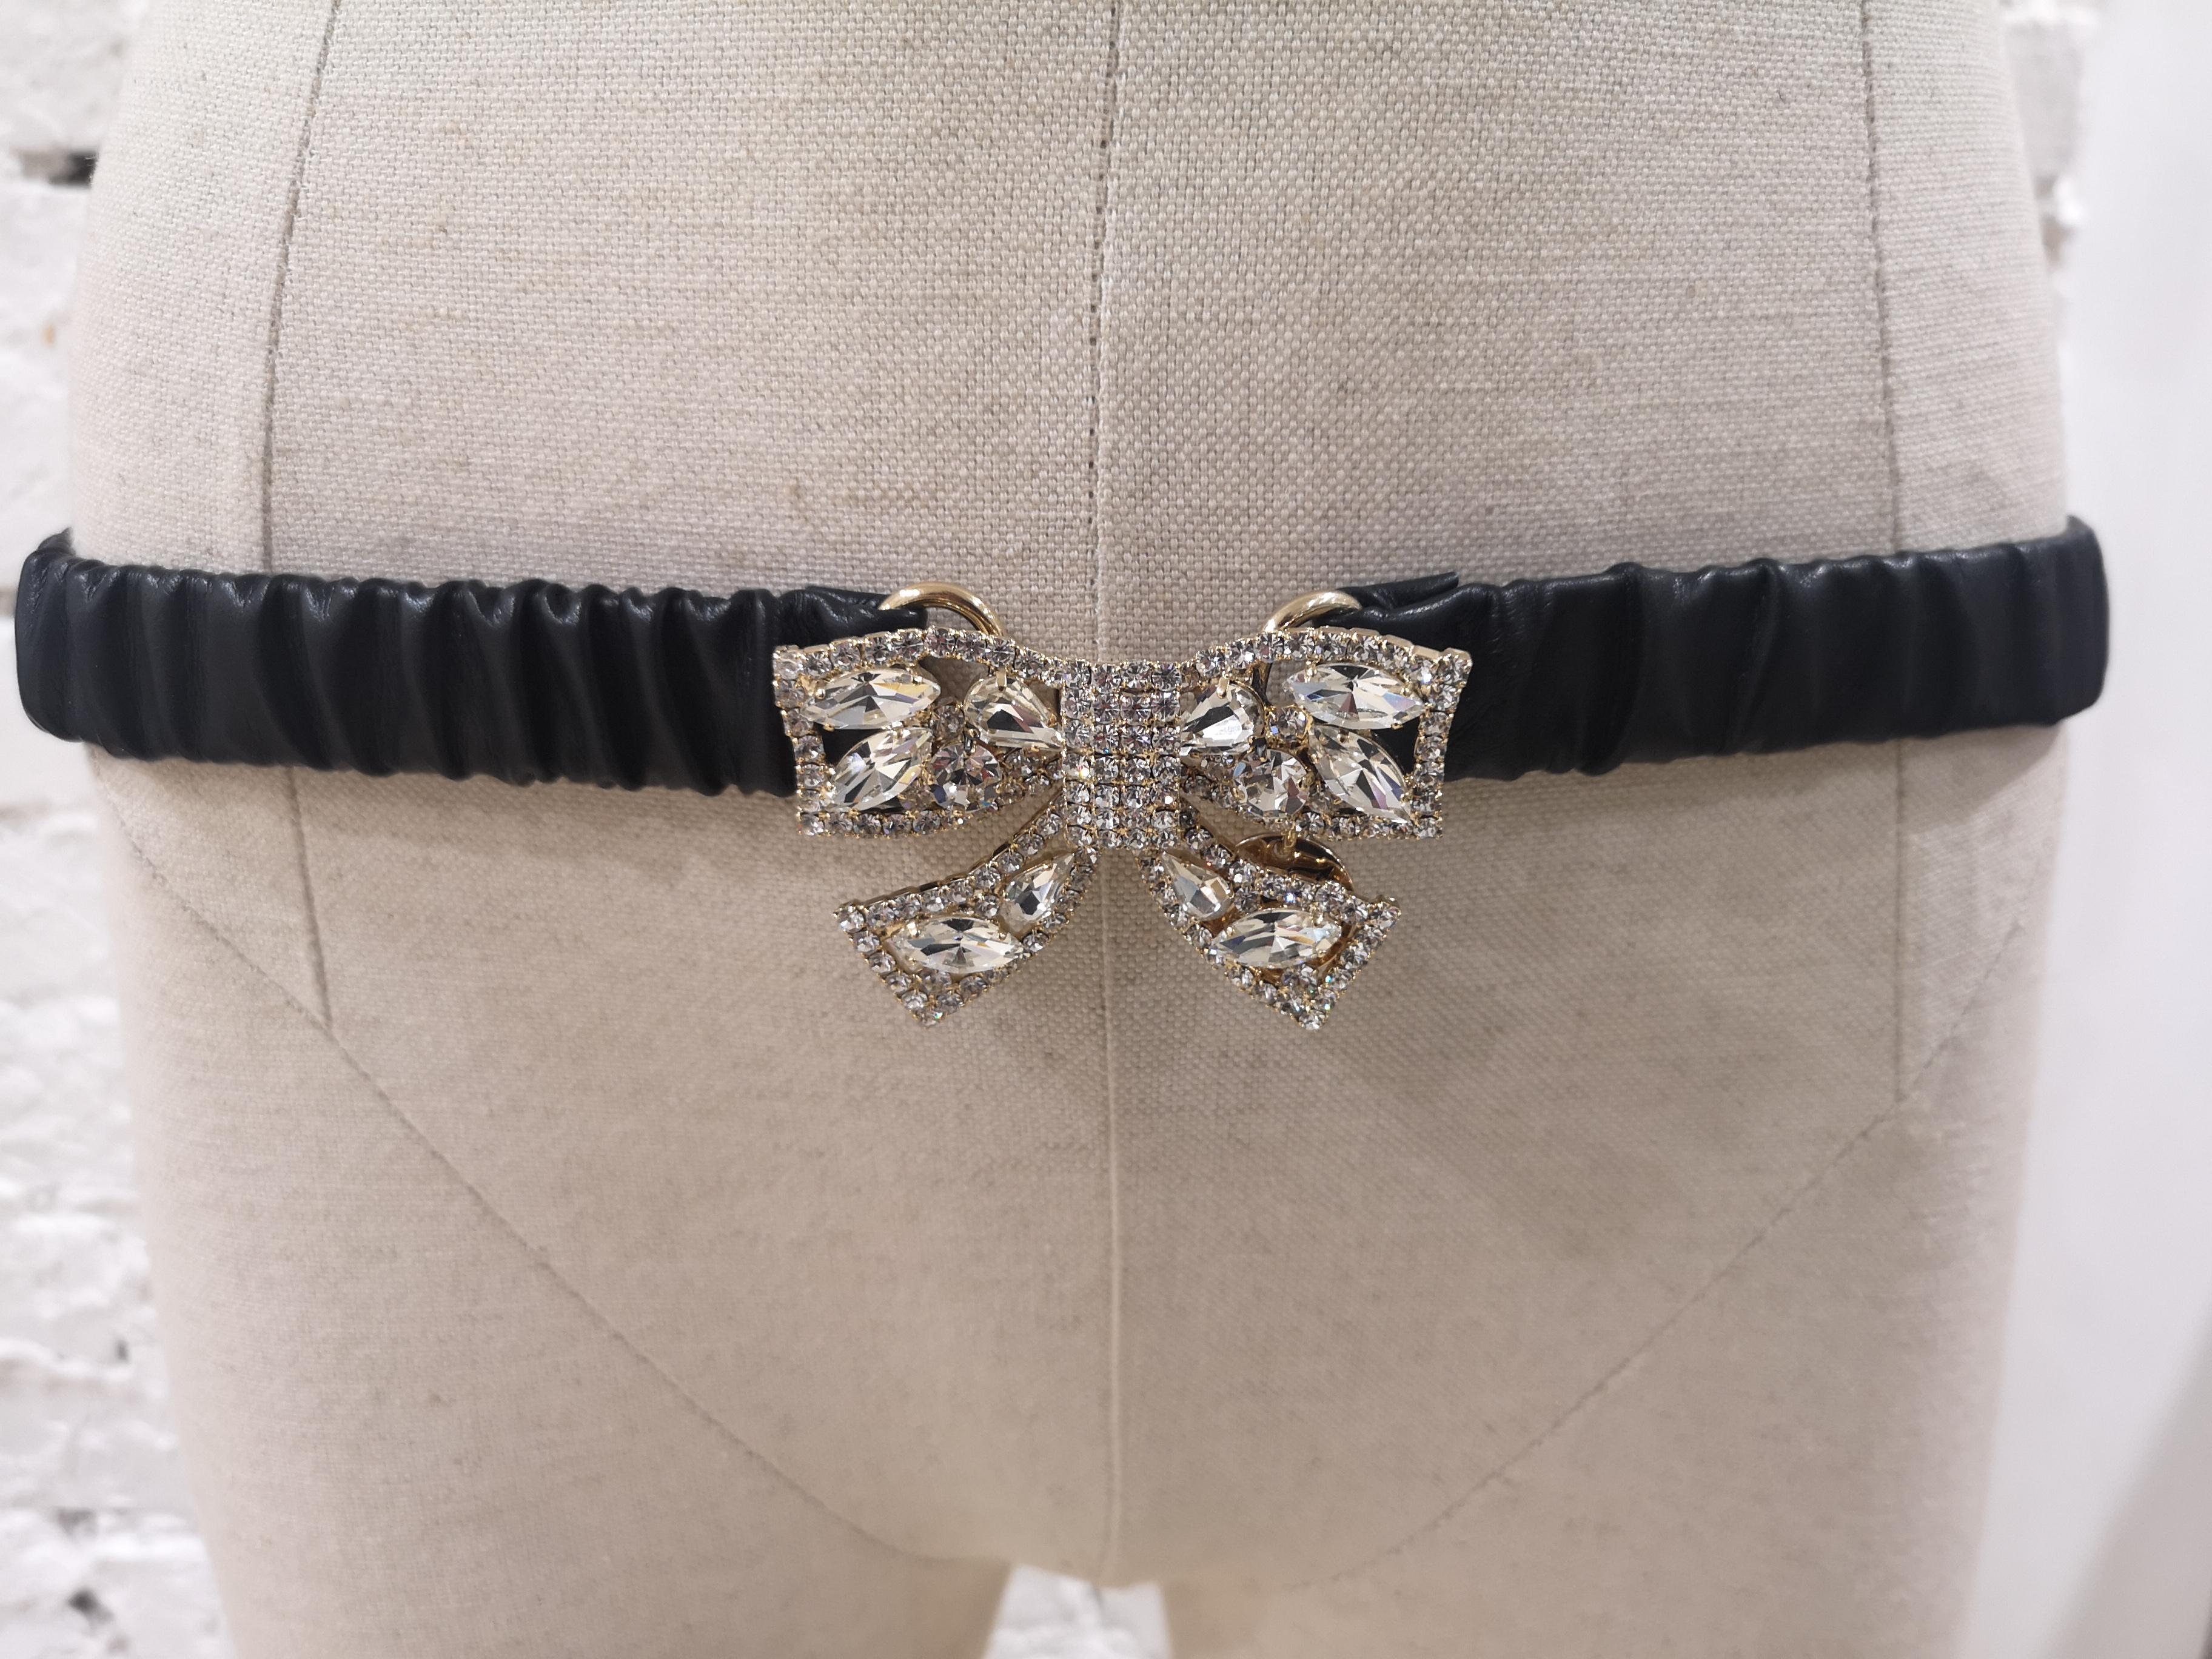 Black leather swarovski bow belt
totally made in italy
one size